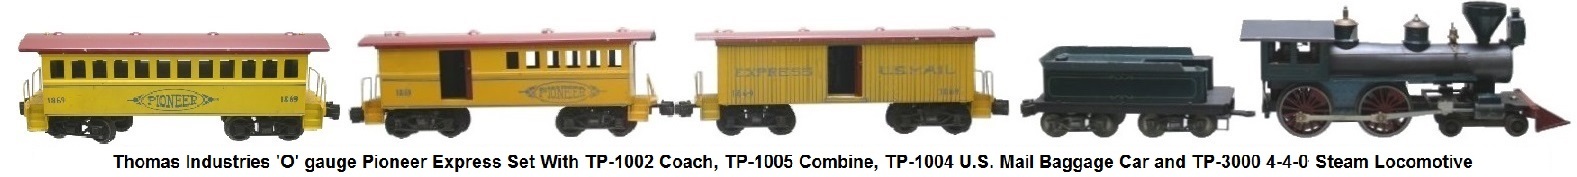 Thomas Industries Pioneer Set 'O' gauge with 1869 US Mail Boxcar, Coach and Combine